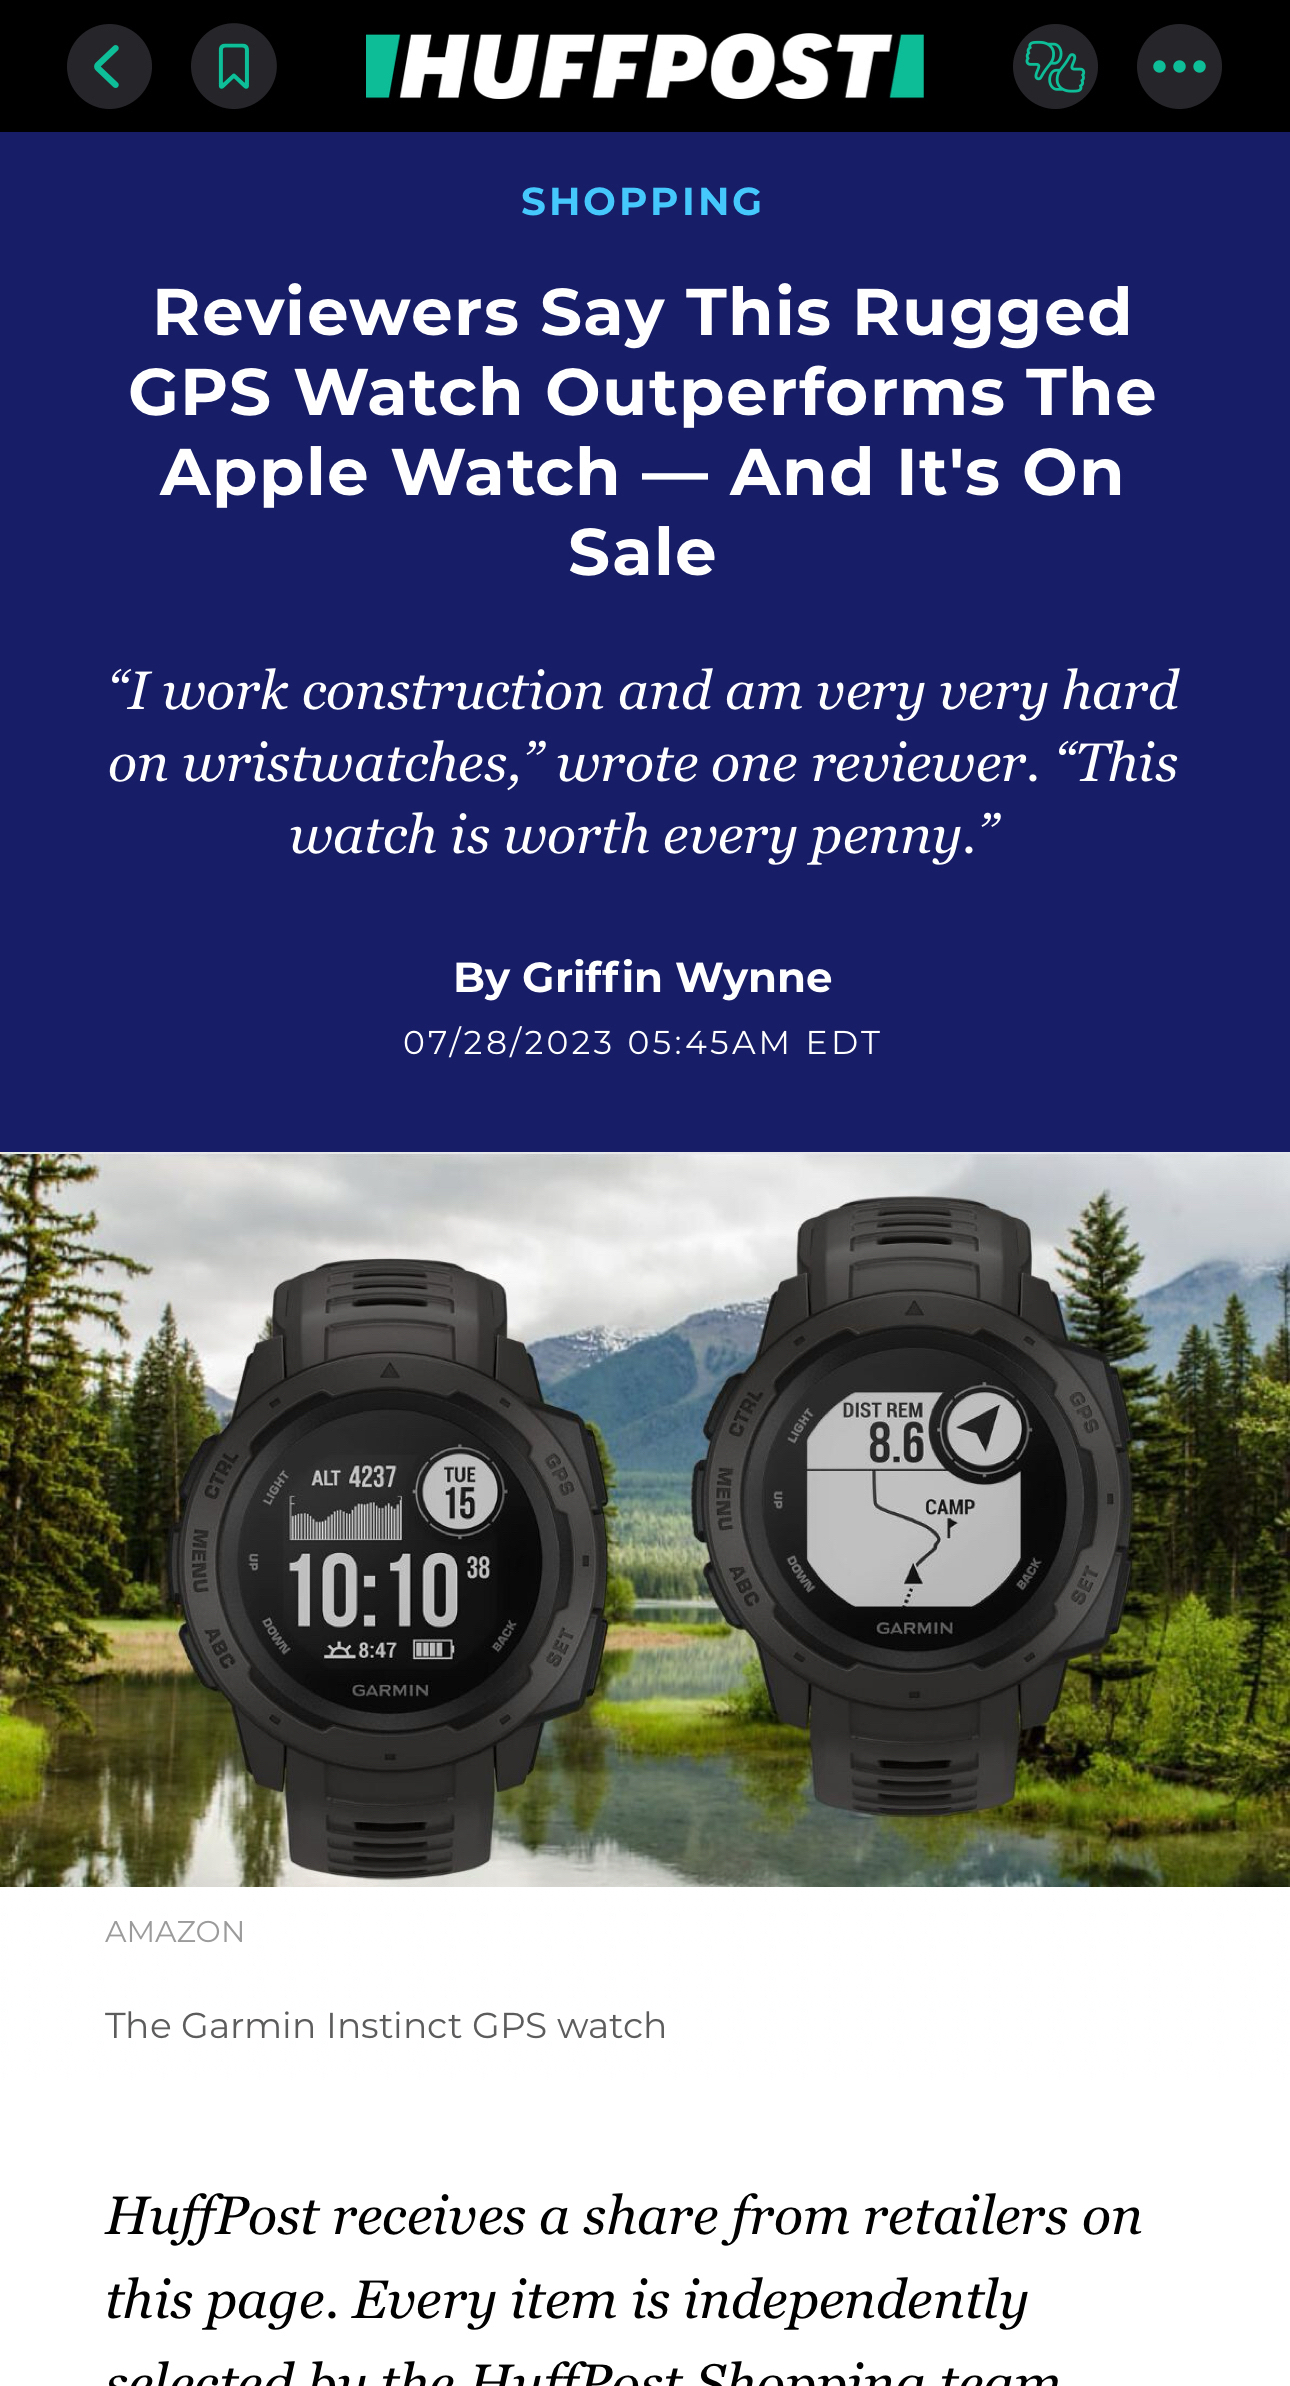 Screenshot of Apple News headline reads “Reviewers Say This Rugged GPS Watch Outperforms The Apple Watch - And It’s OnSale”  